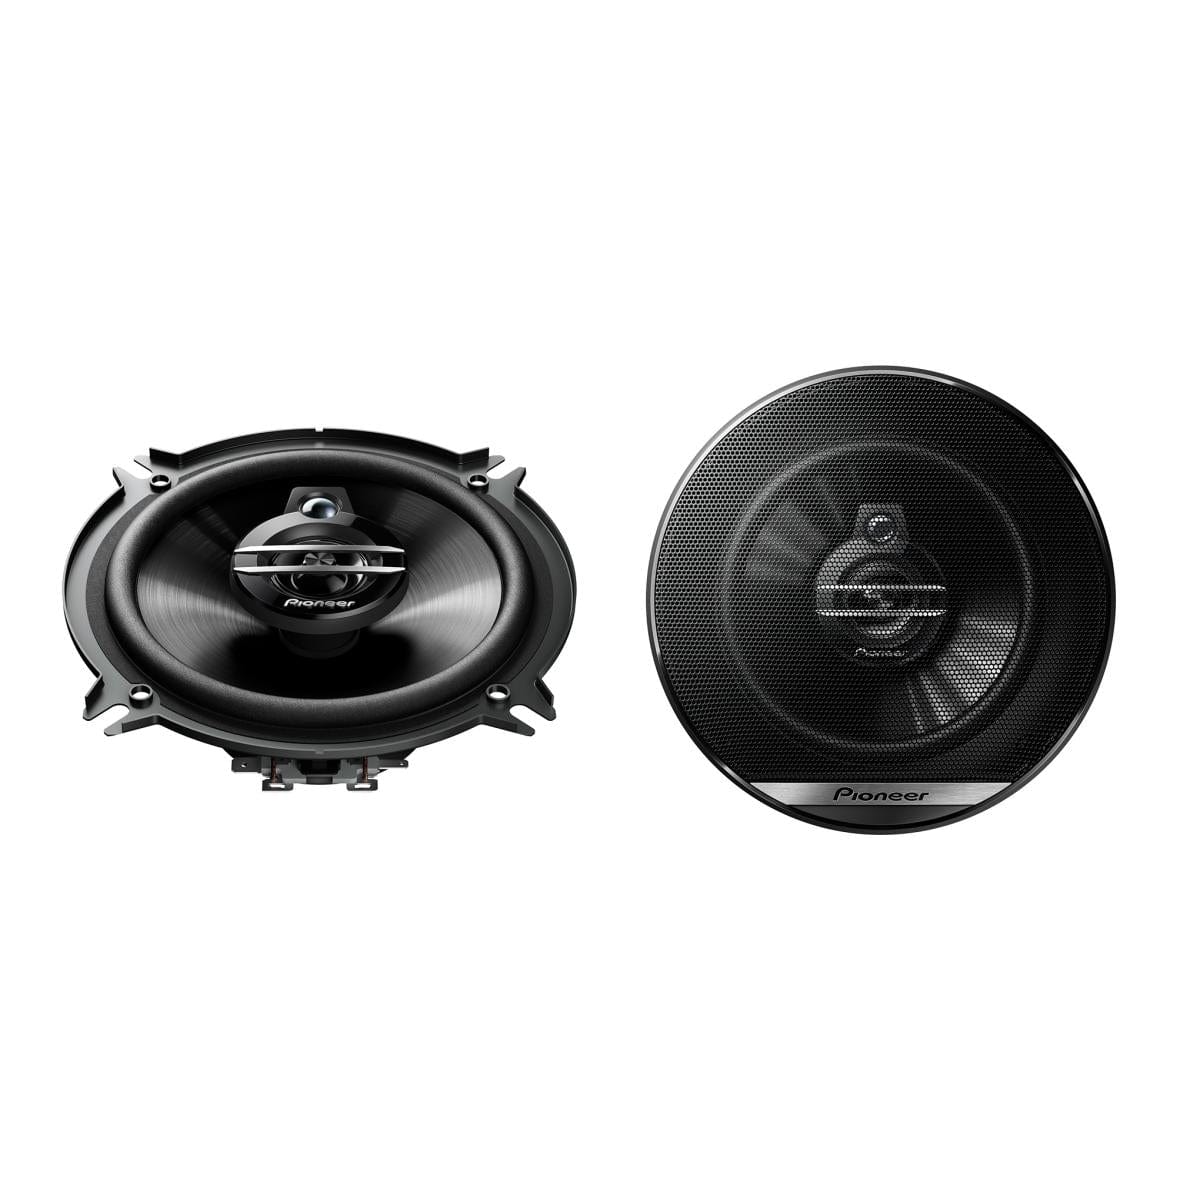 TS-G1030F - Voiture Speaker Systems